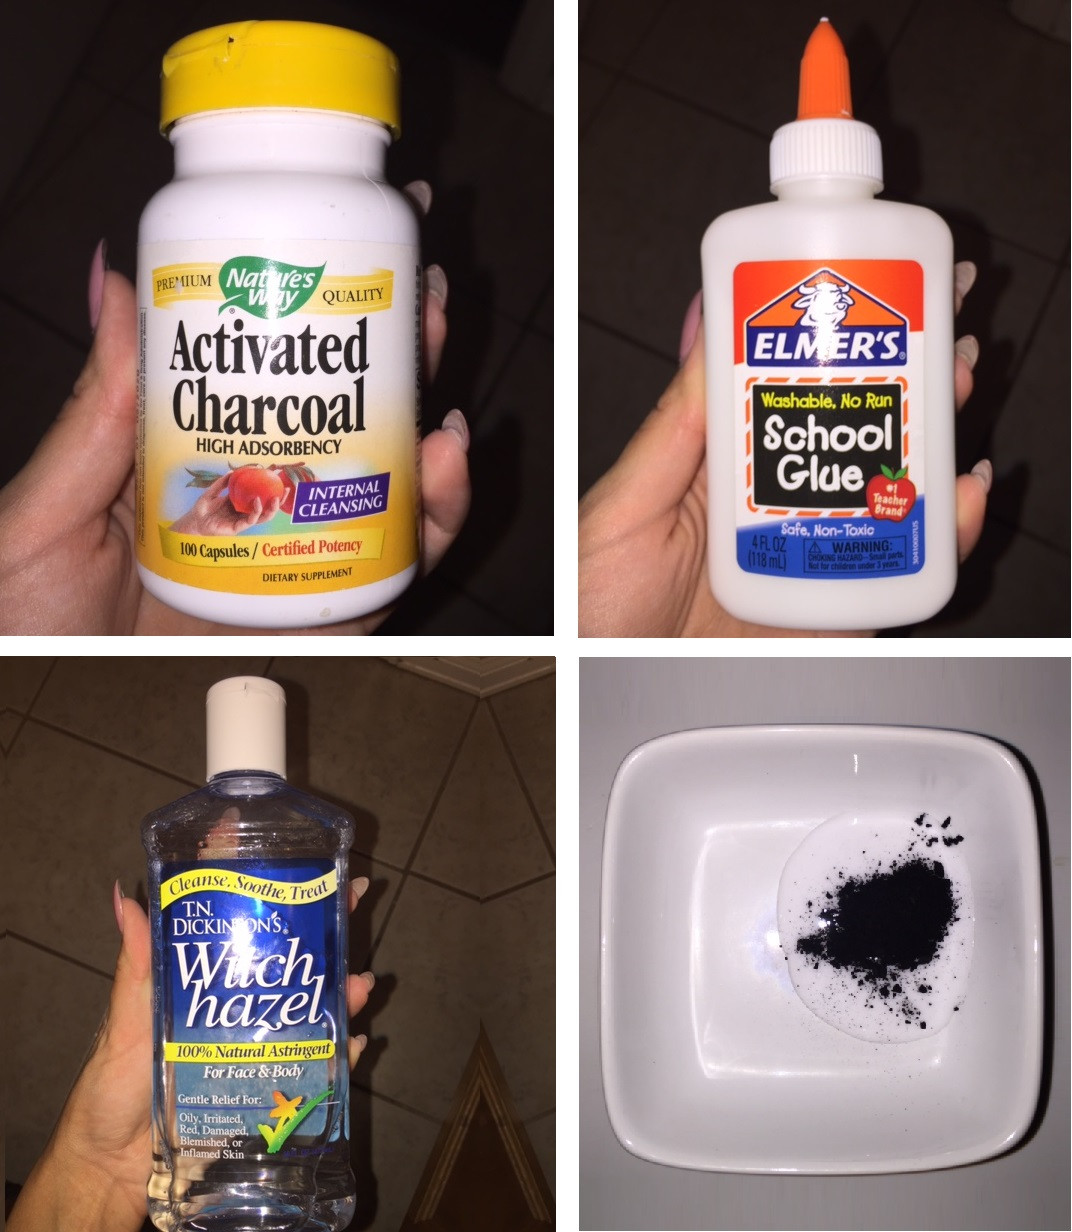 DIY Charcoal Mask With Glue
 Activated Charcoal Face Mask Recipe With Glue